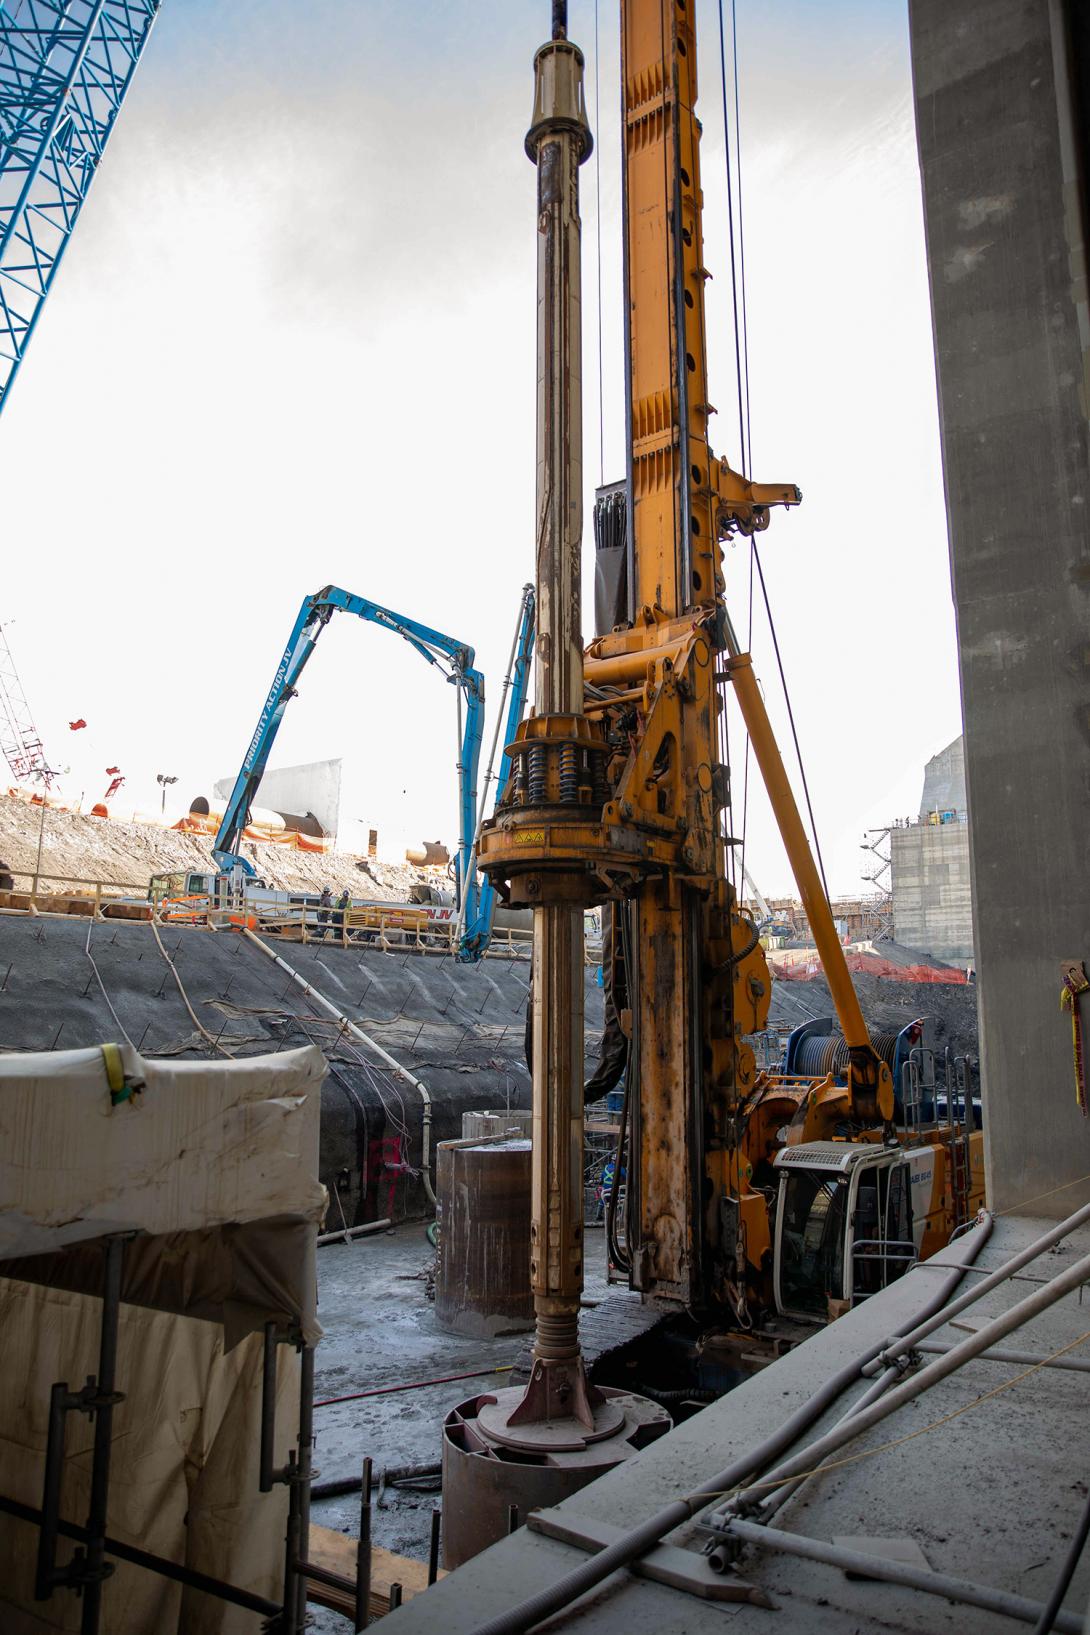 A pile driver is used to core holes 60 inches in diameter and 40 metres deep, as part of foundation enhancement at the tailrace. ! September 2022